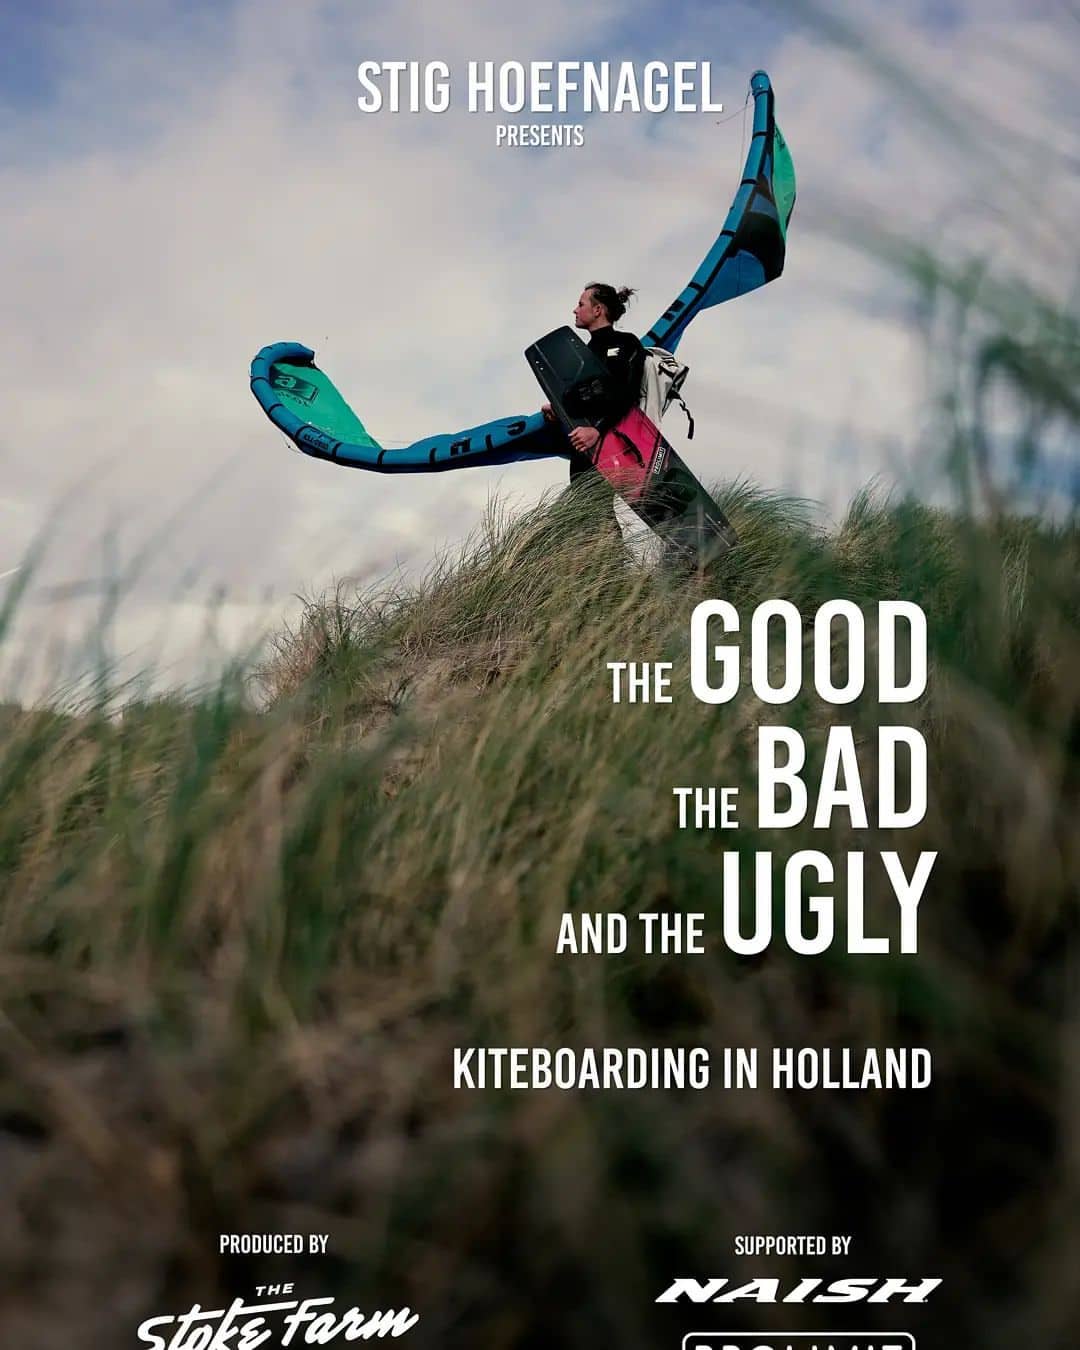 @stig_hoefnagel has been busy. Grab yourself a coffee, make some popcorn, and sit down to enjoy this tour of the Netherlands...

Click on our website to watch
@naish_kiteboarding